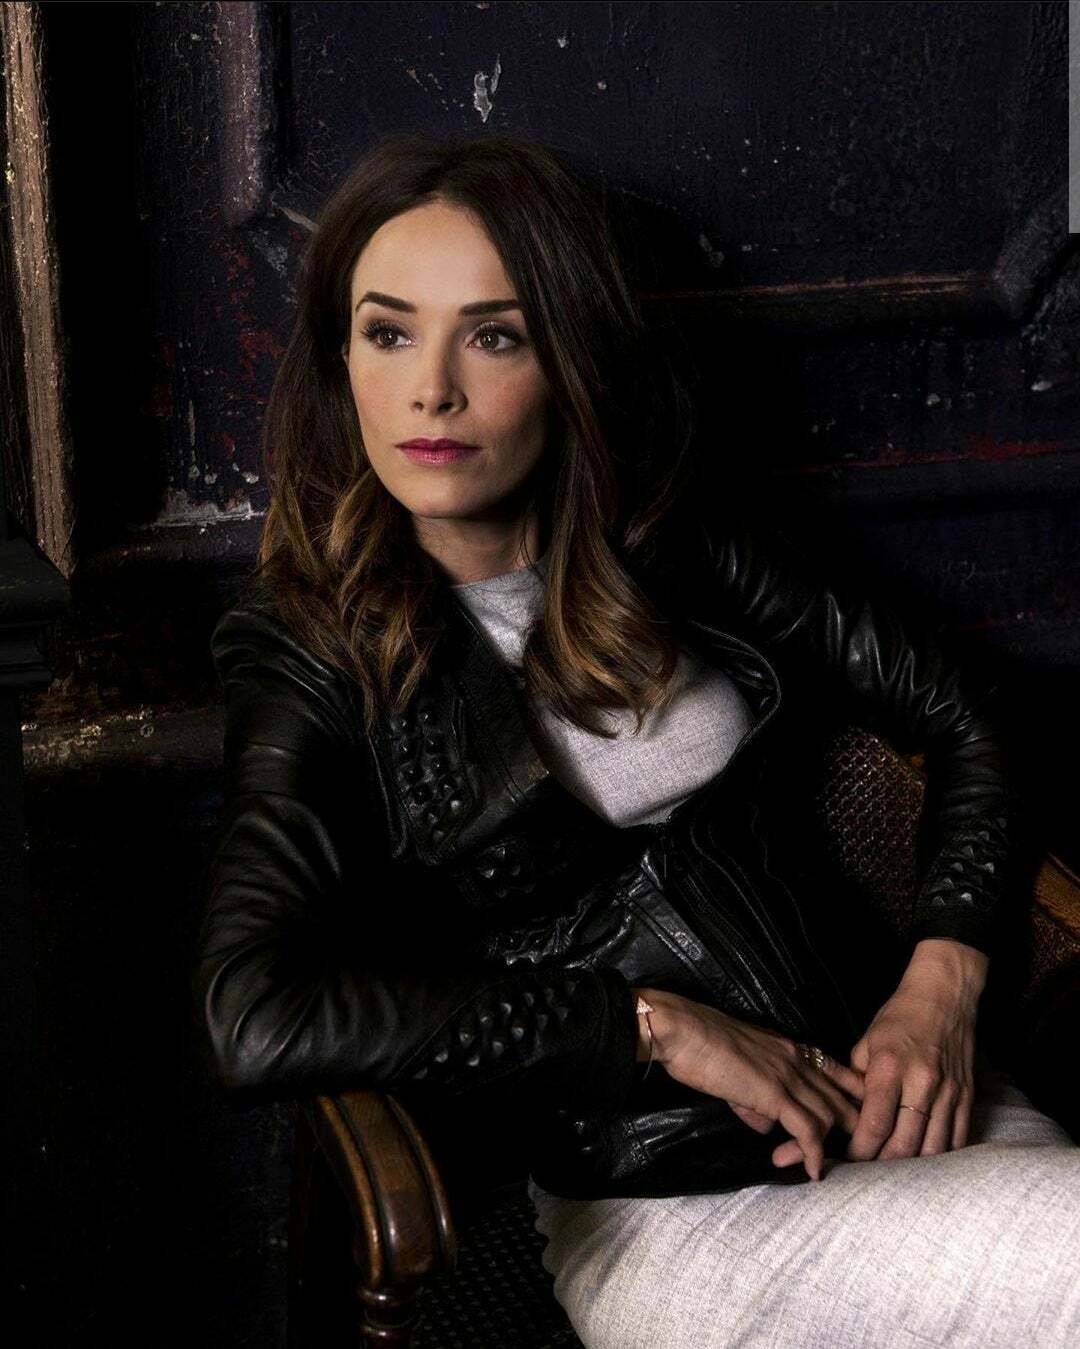 Lusting over Abigail Spencer. Can't stop jerking to her masturbation vids. Imagine your the lucky fuck that gets called for room service by her. You walk in the room and she filming her fingering herself. WWYD?